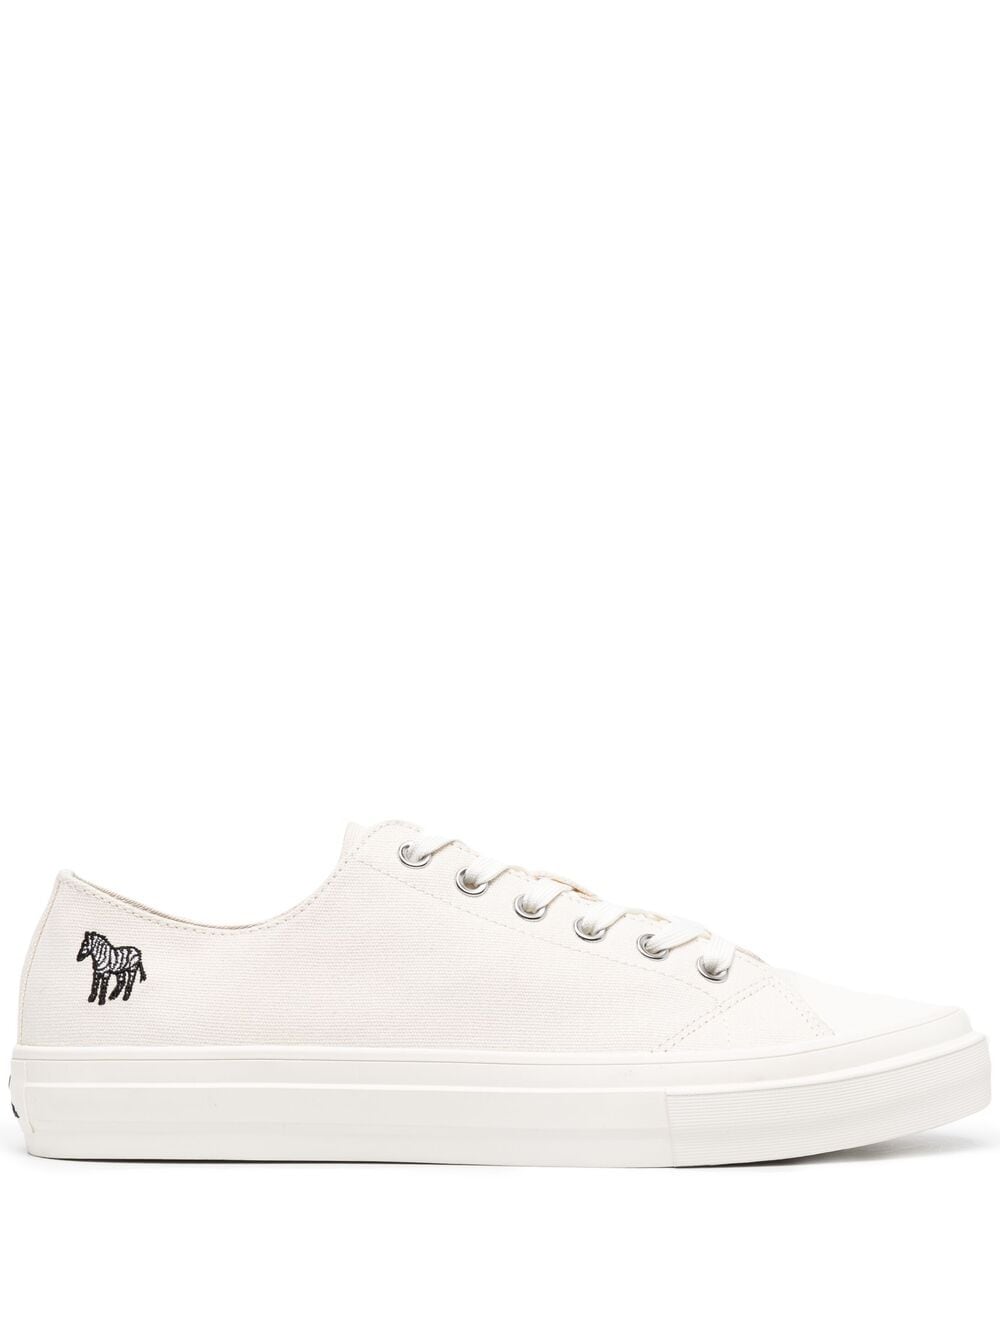 Image 1 of PS Paul Smith low-top sneakers